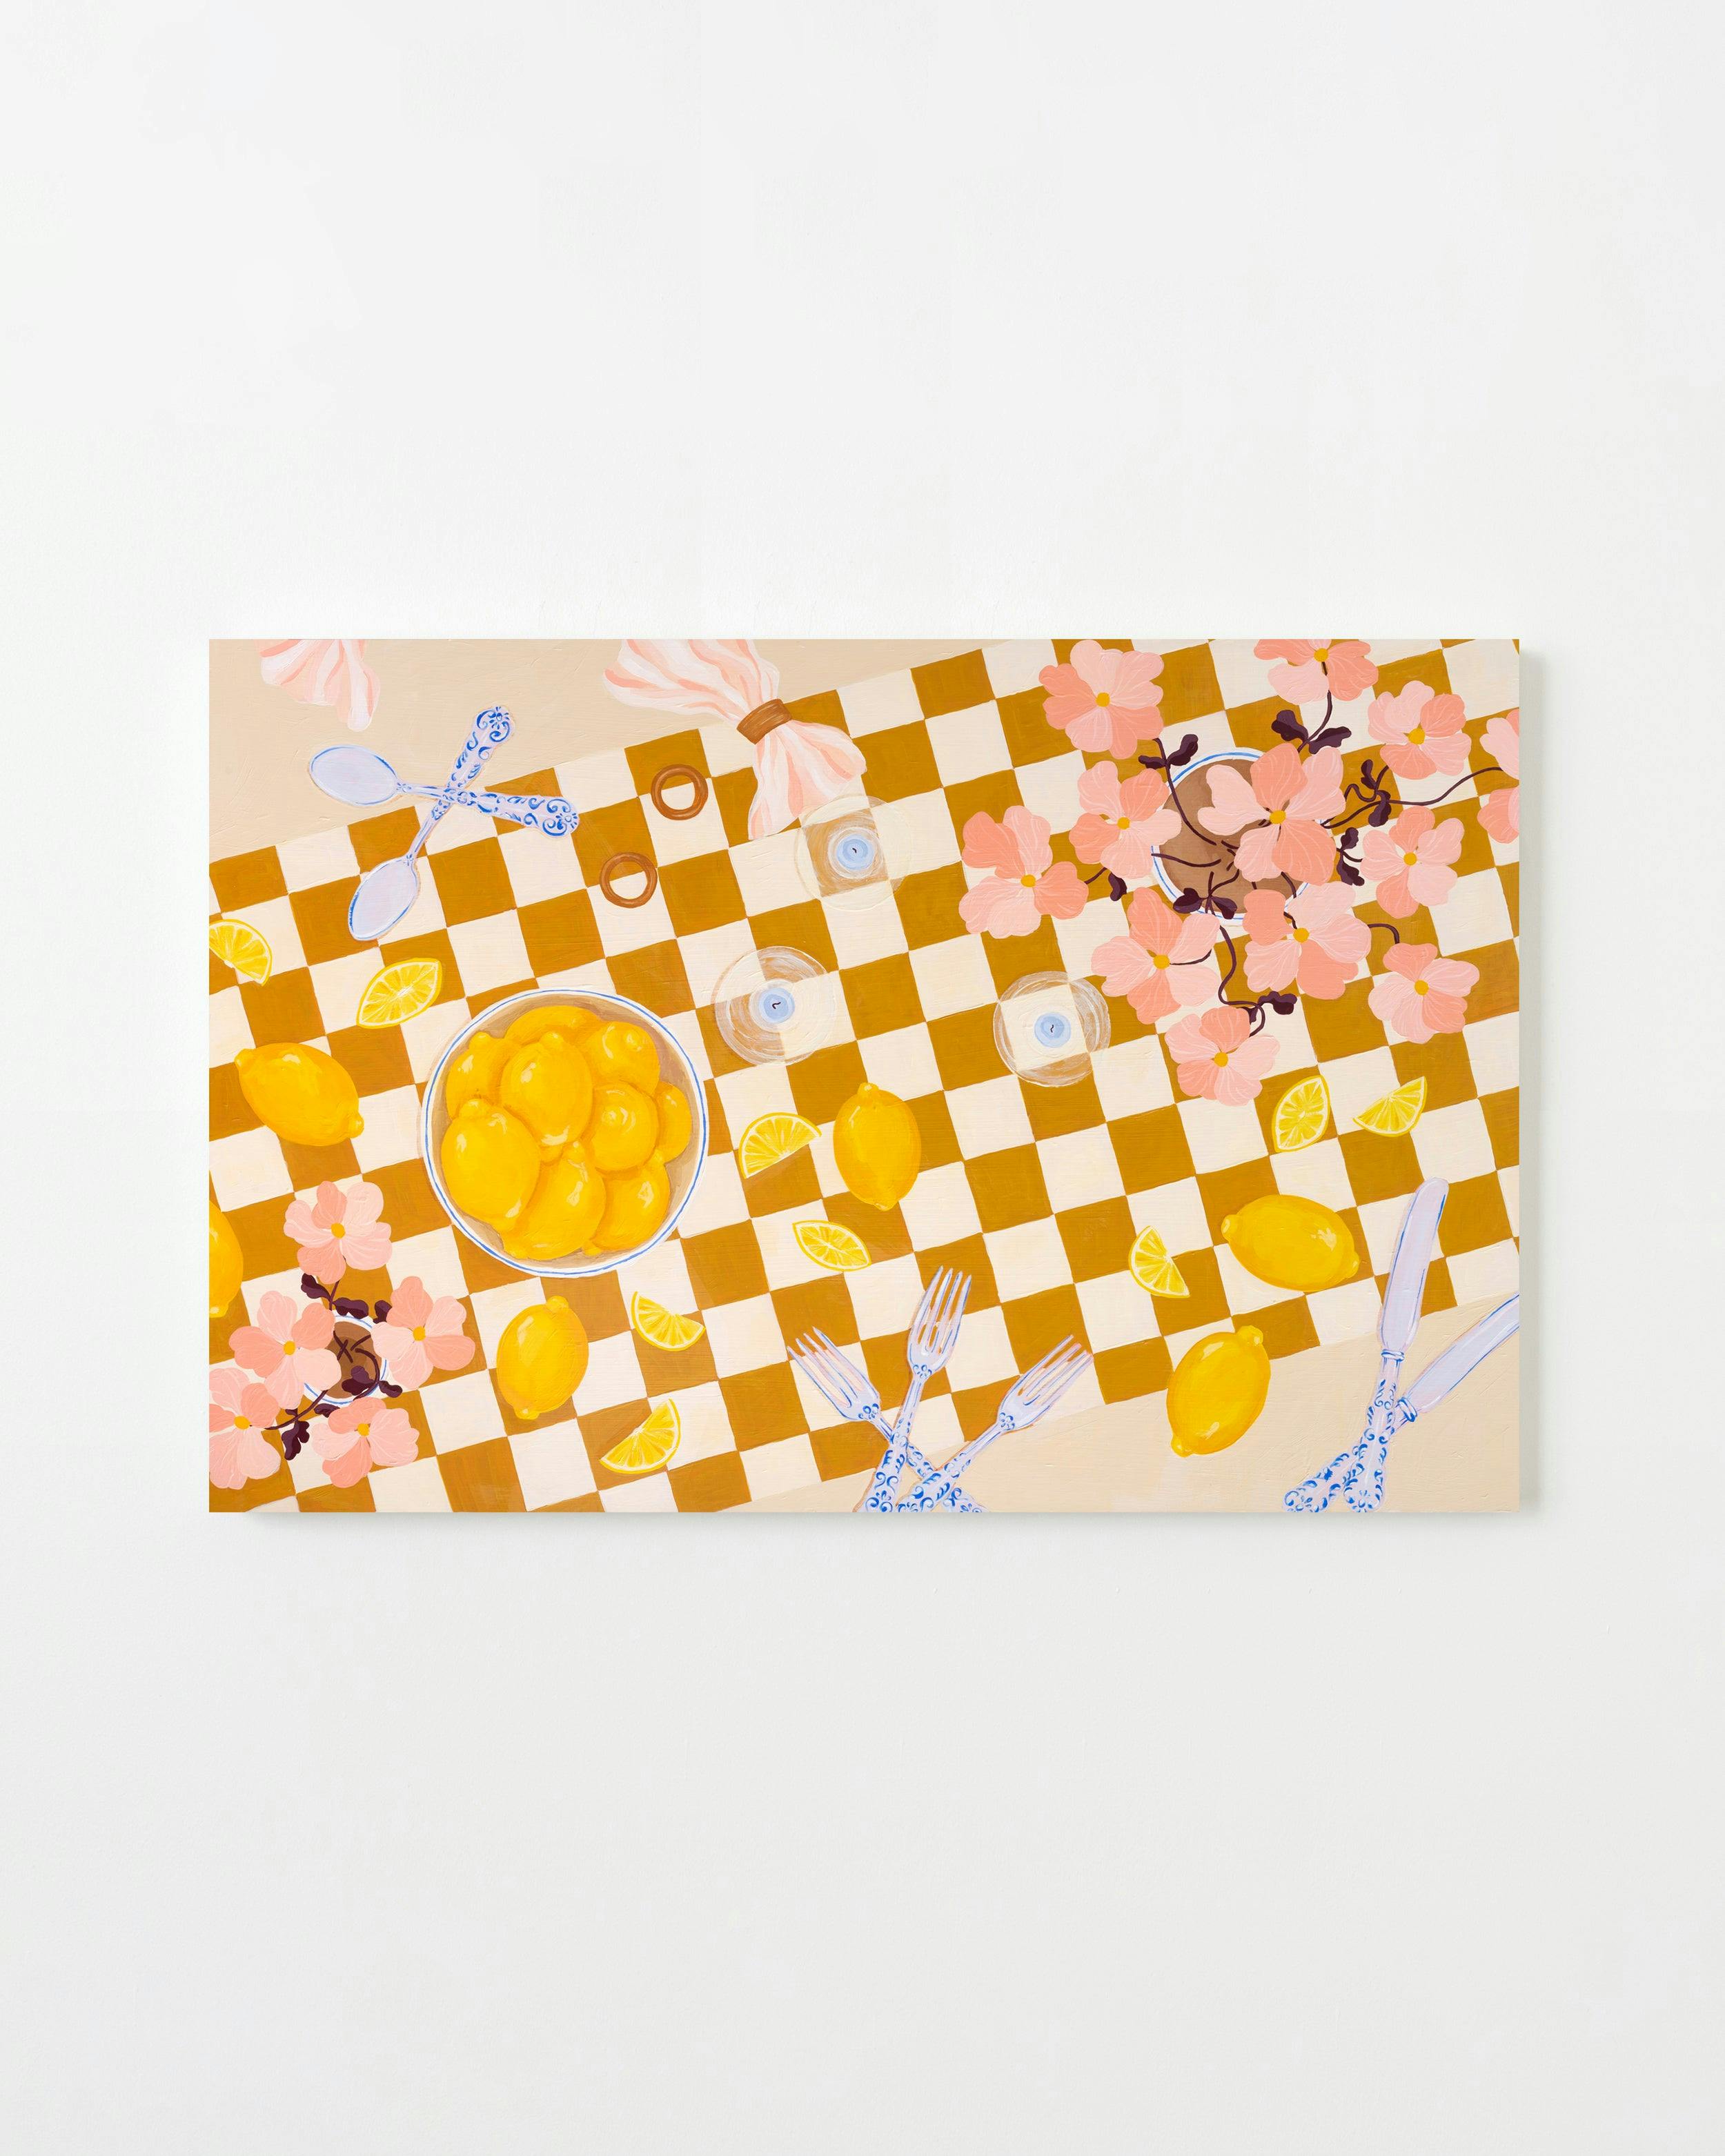 Painting by Haley Elise Hughes titled "Citrus Gathering".